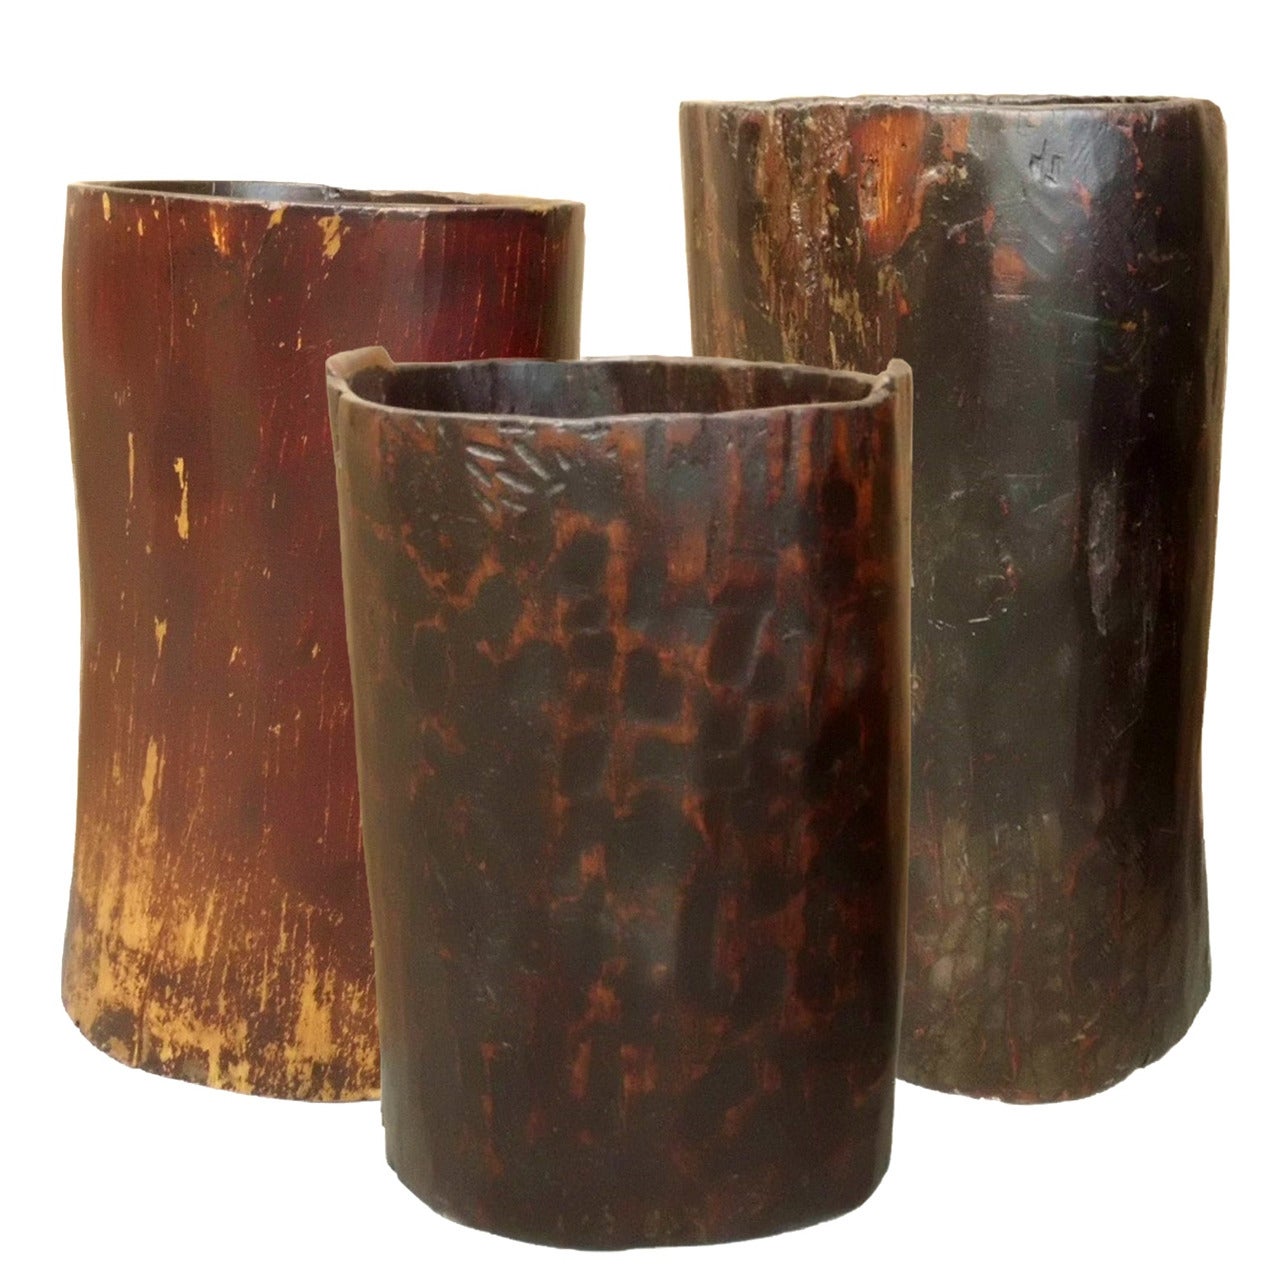 Set of Three Giant Antique Whole Tree Stump Wooden Pots or Planters For Sale